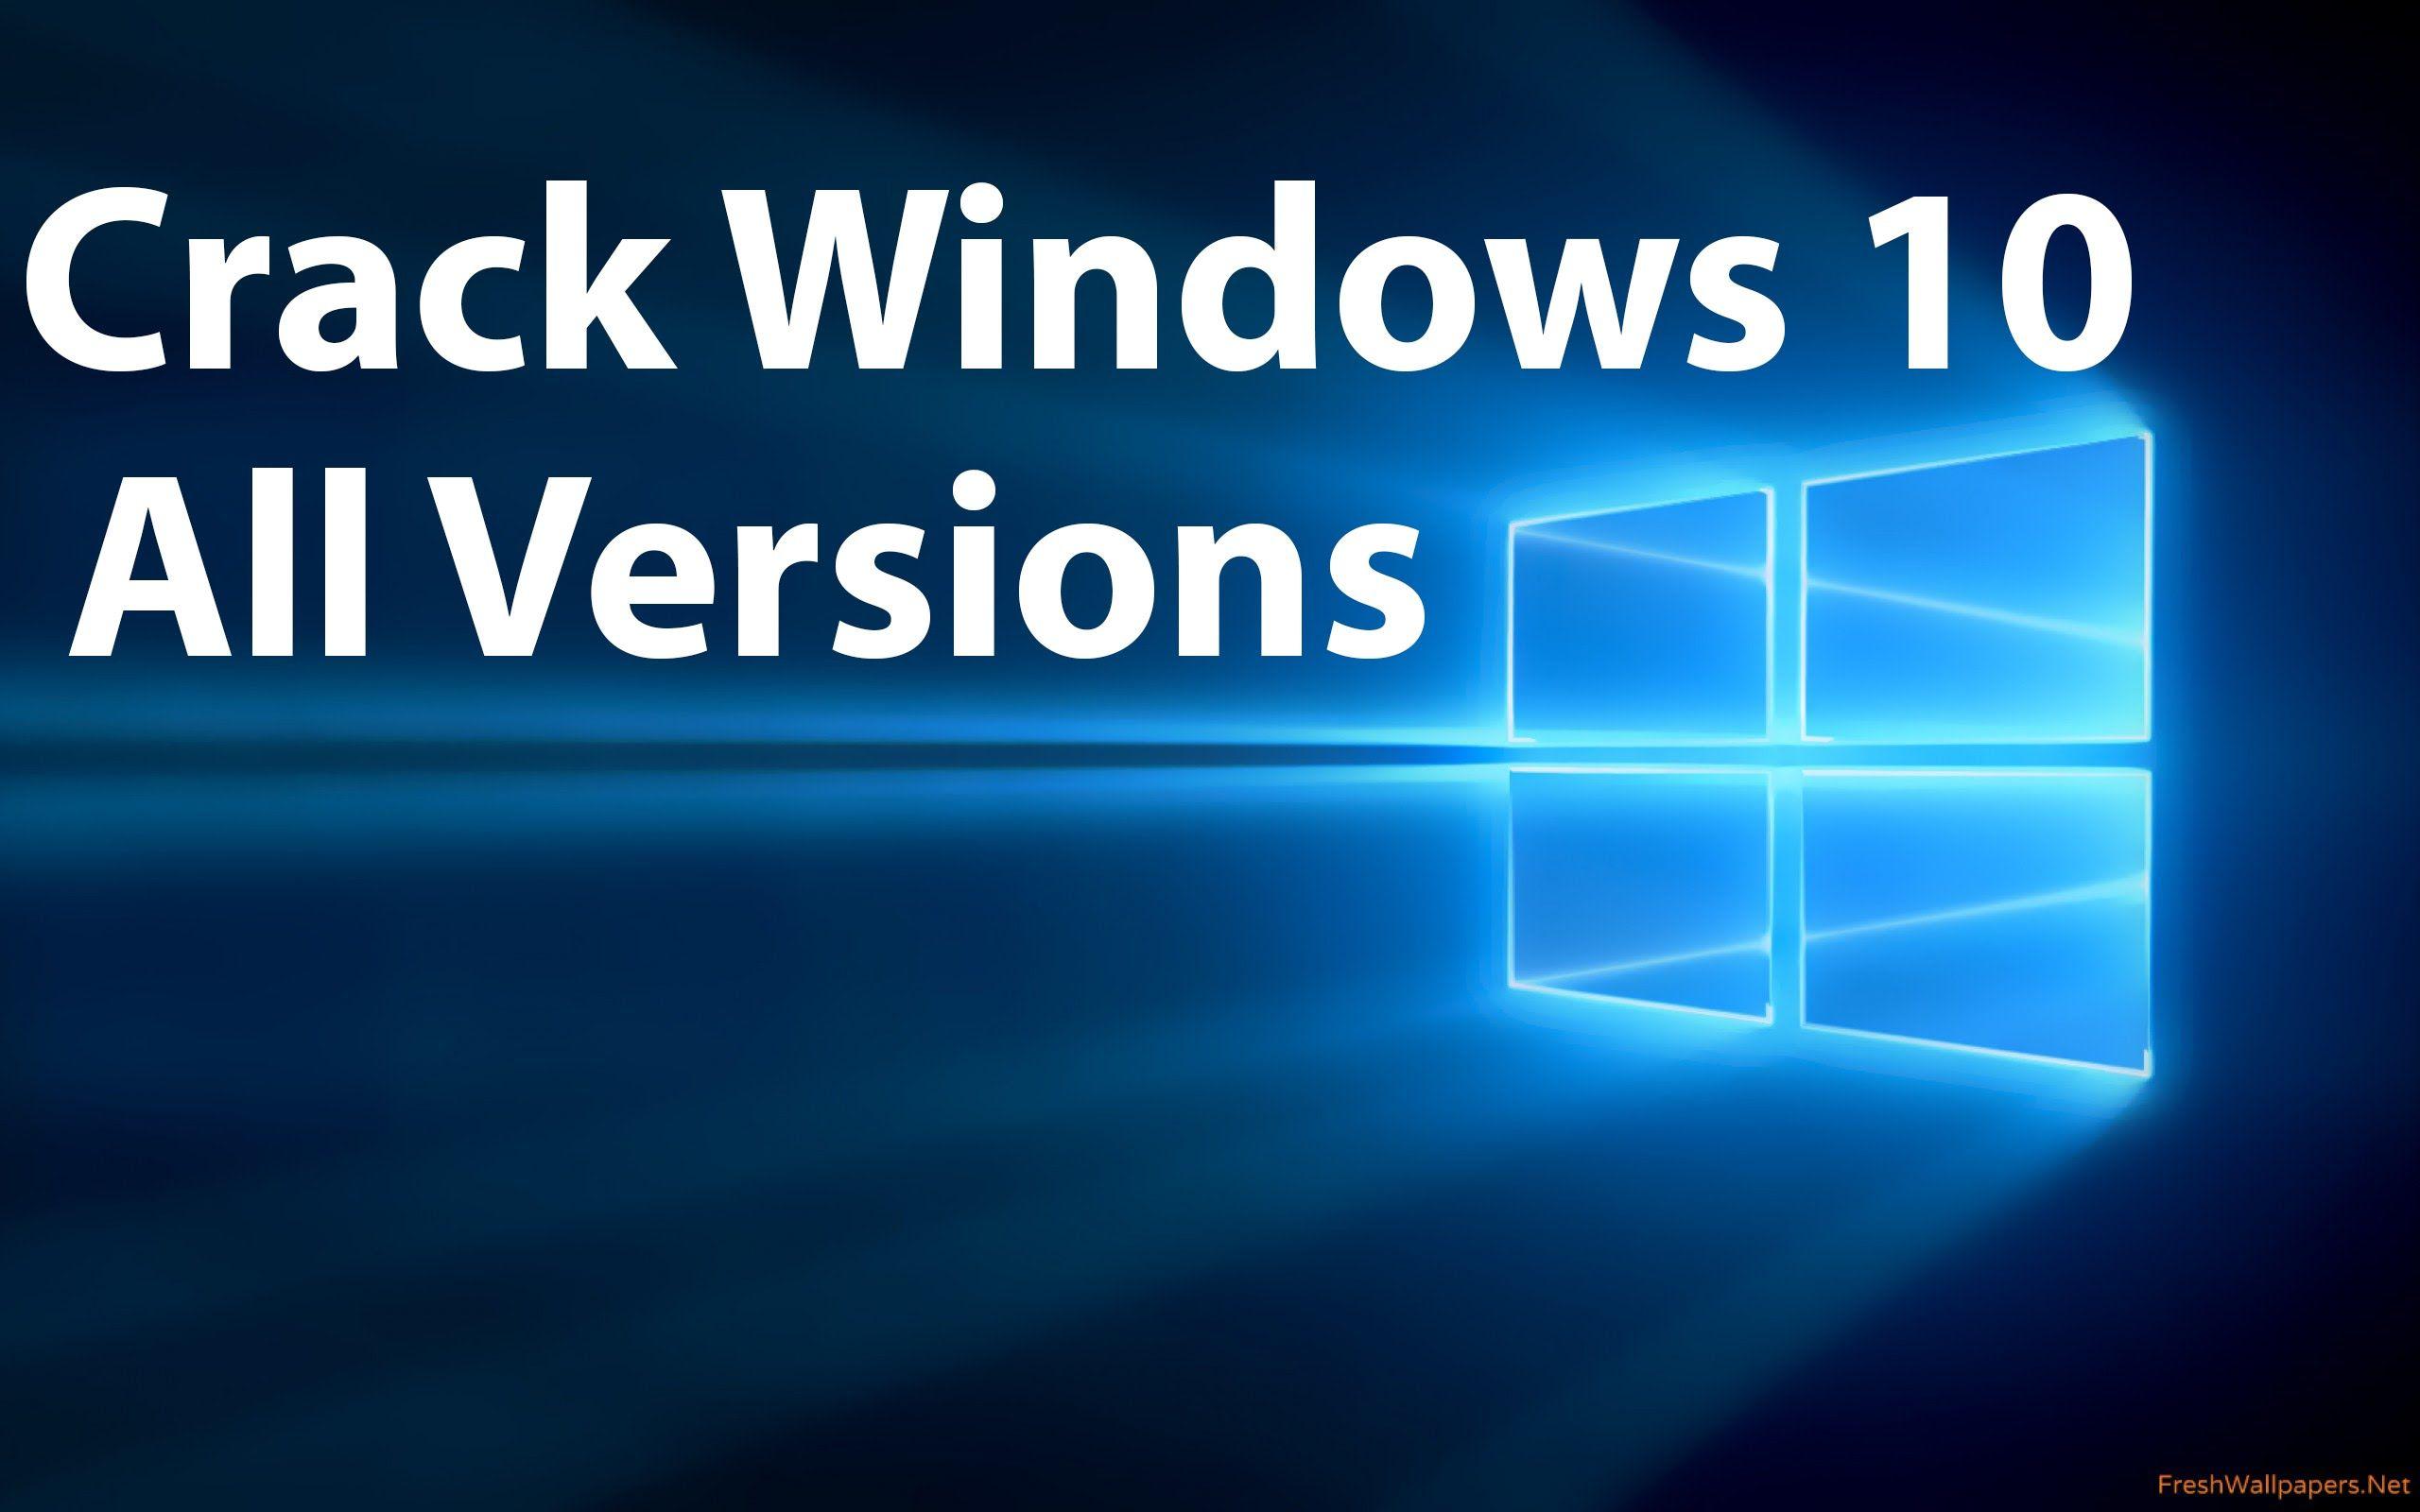 How To Crack Windows 10 All Versions